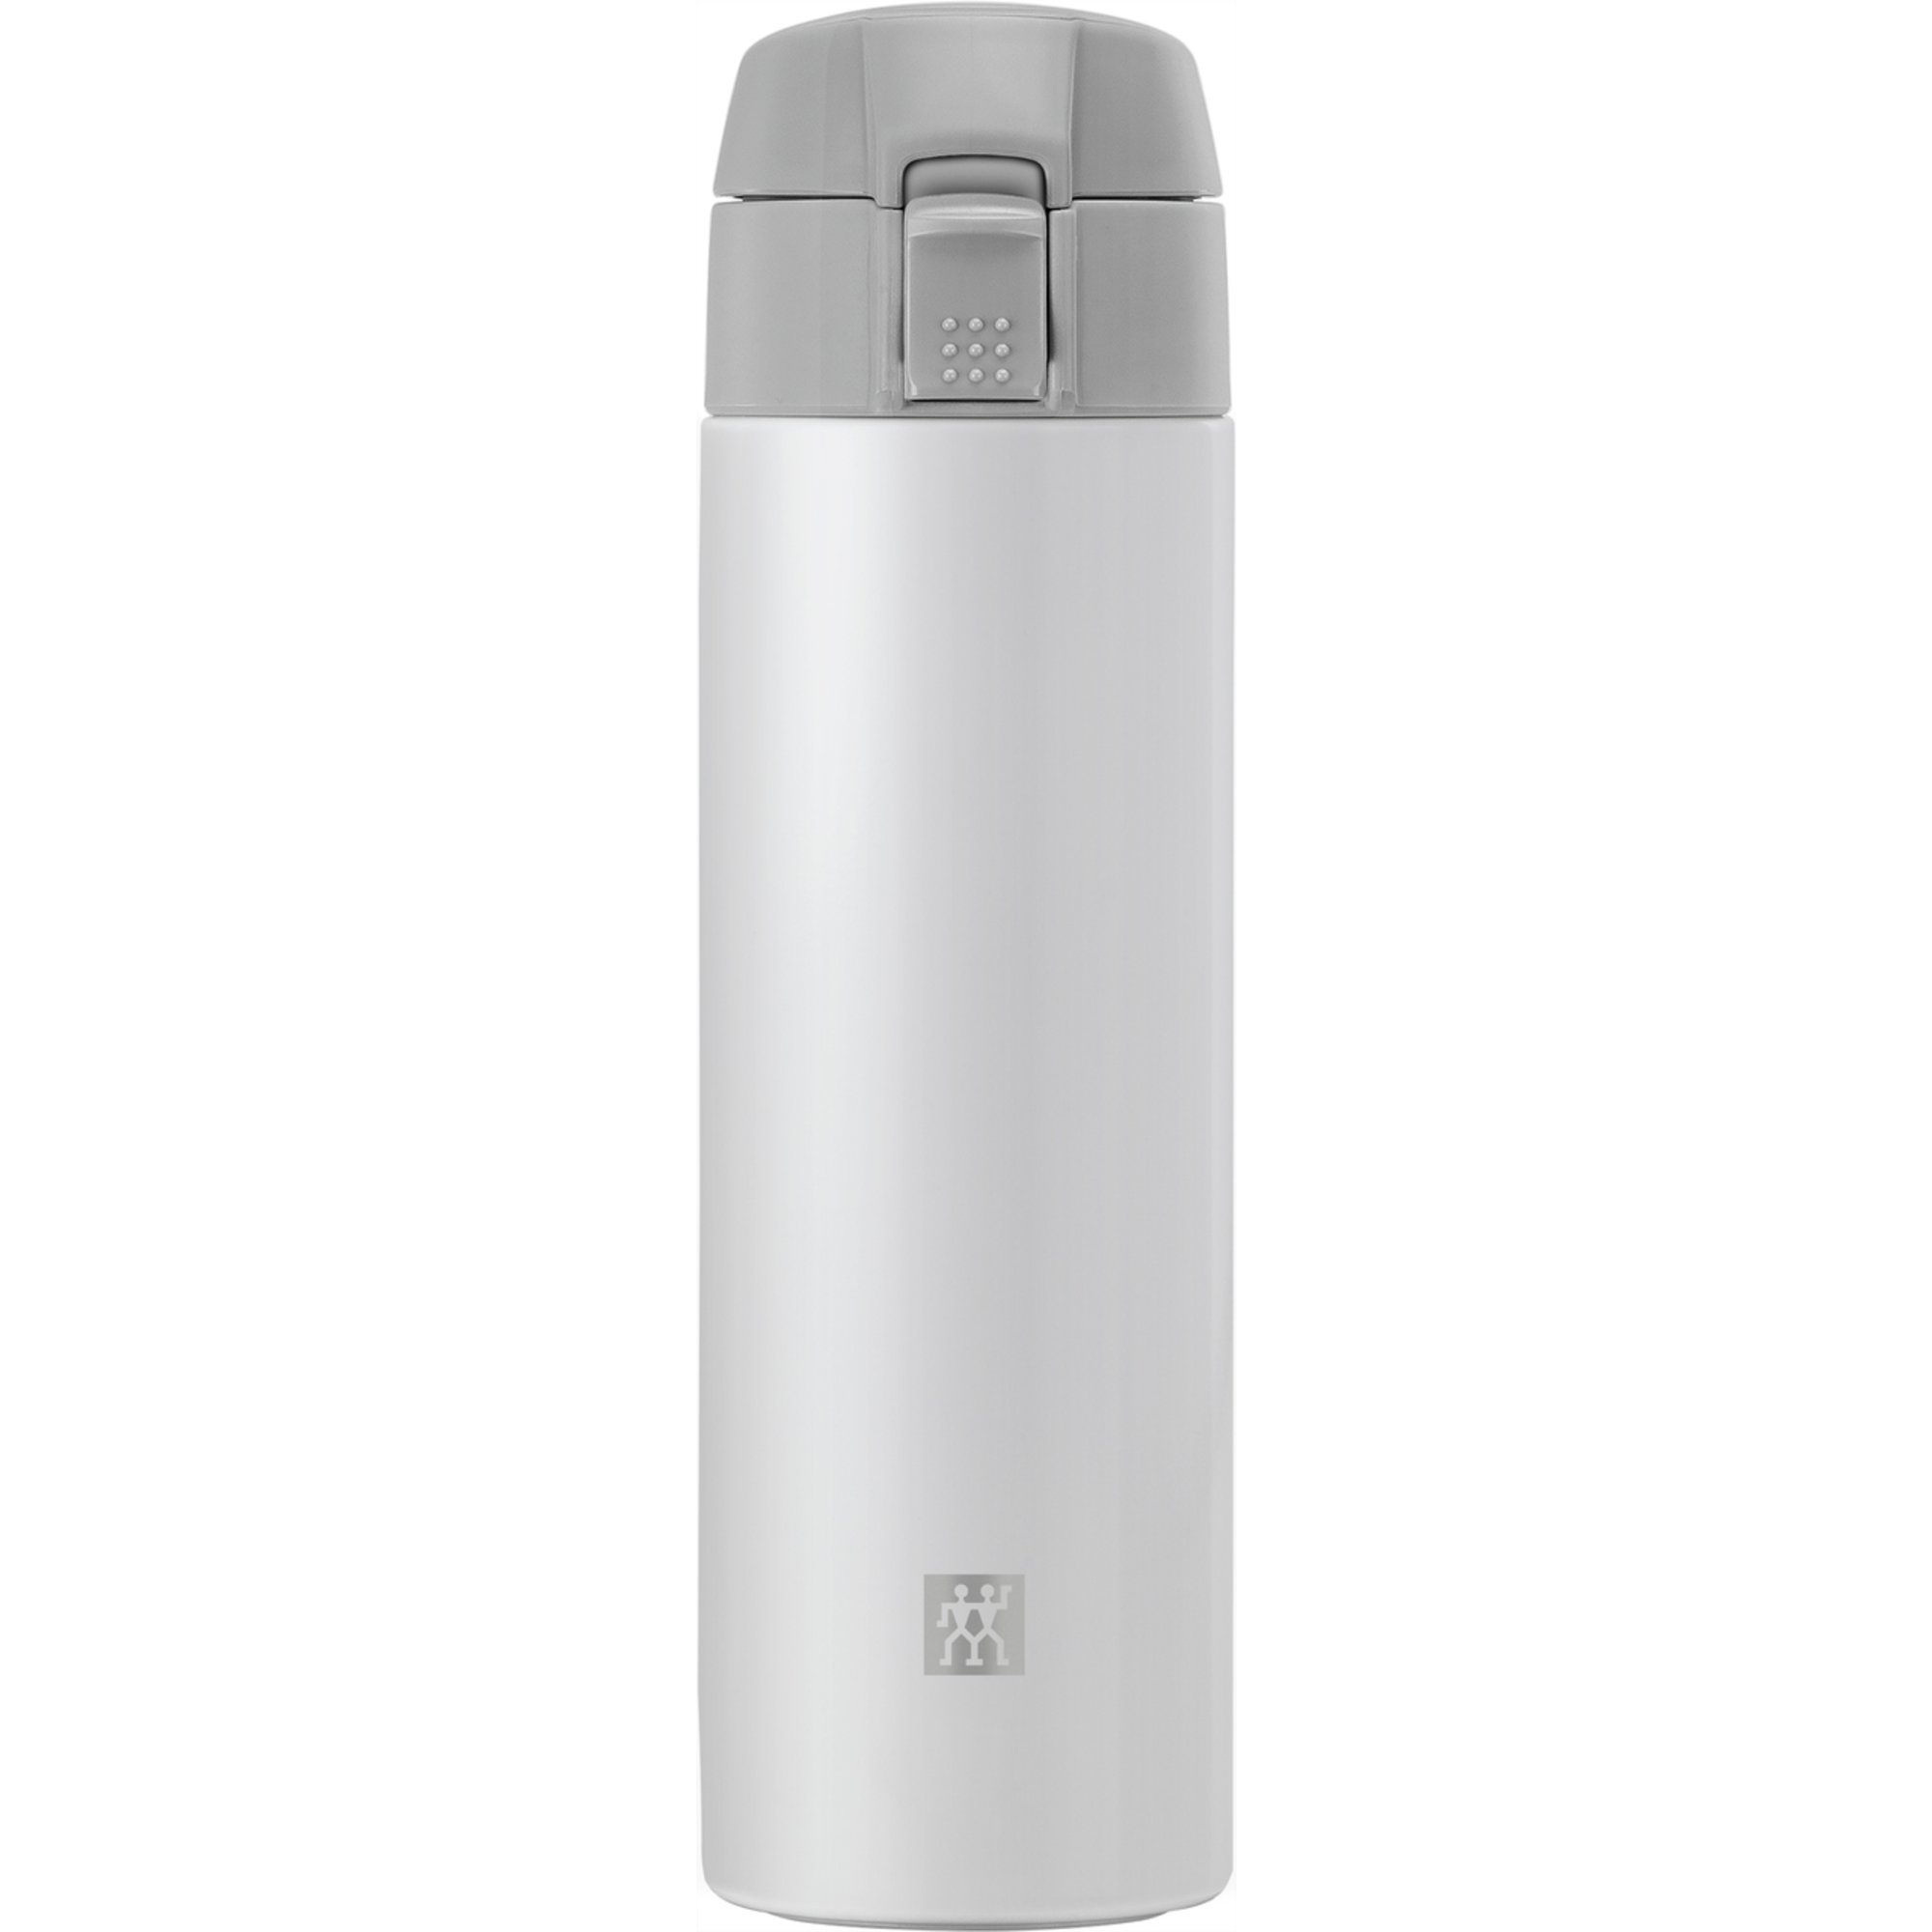 Zwilling Thermo termokrus 450 ml, hvid